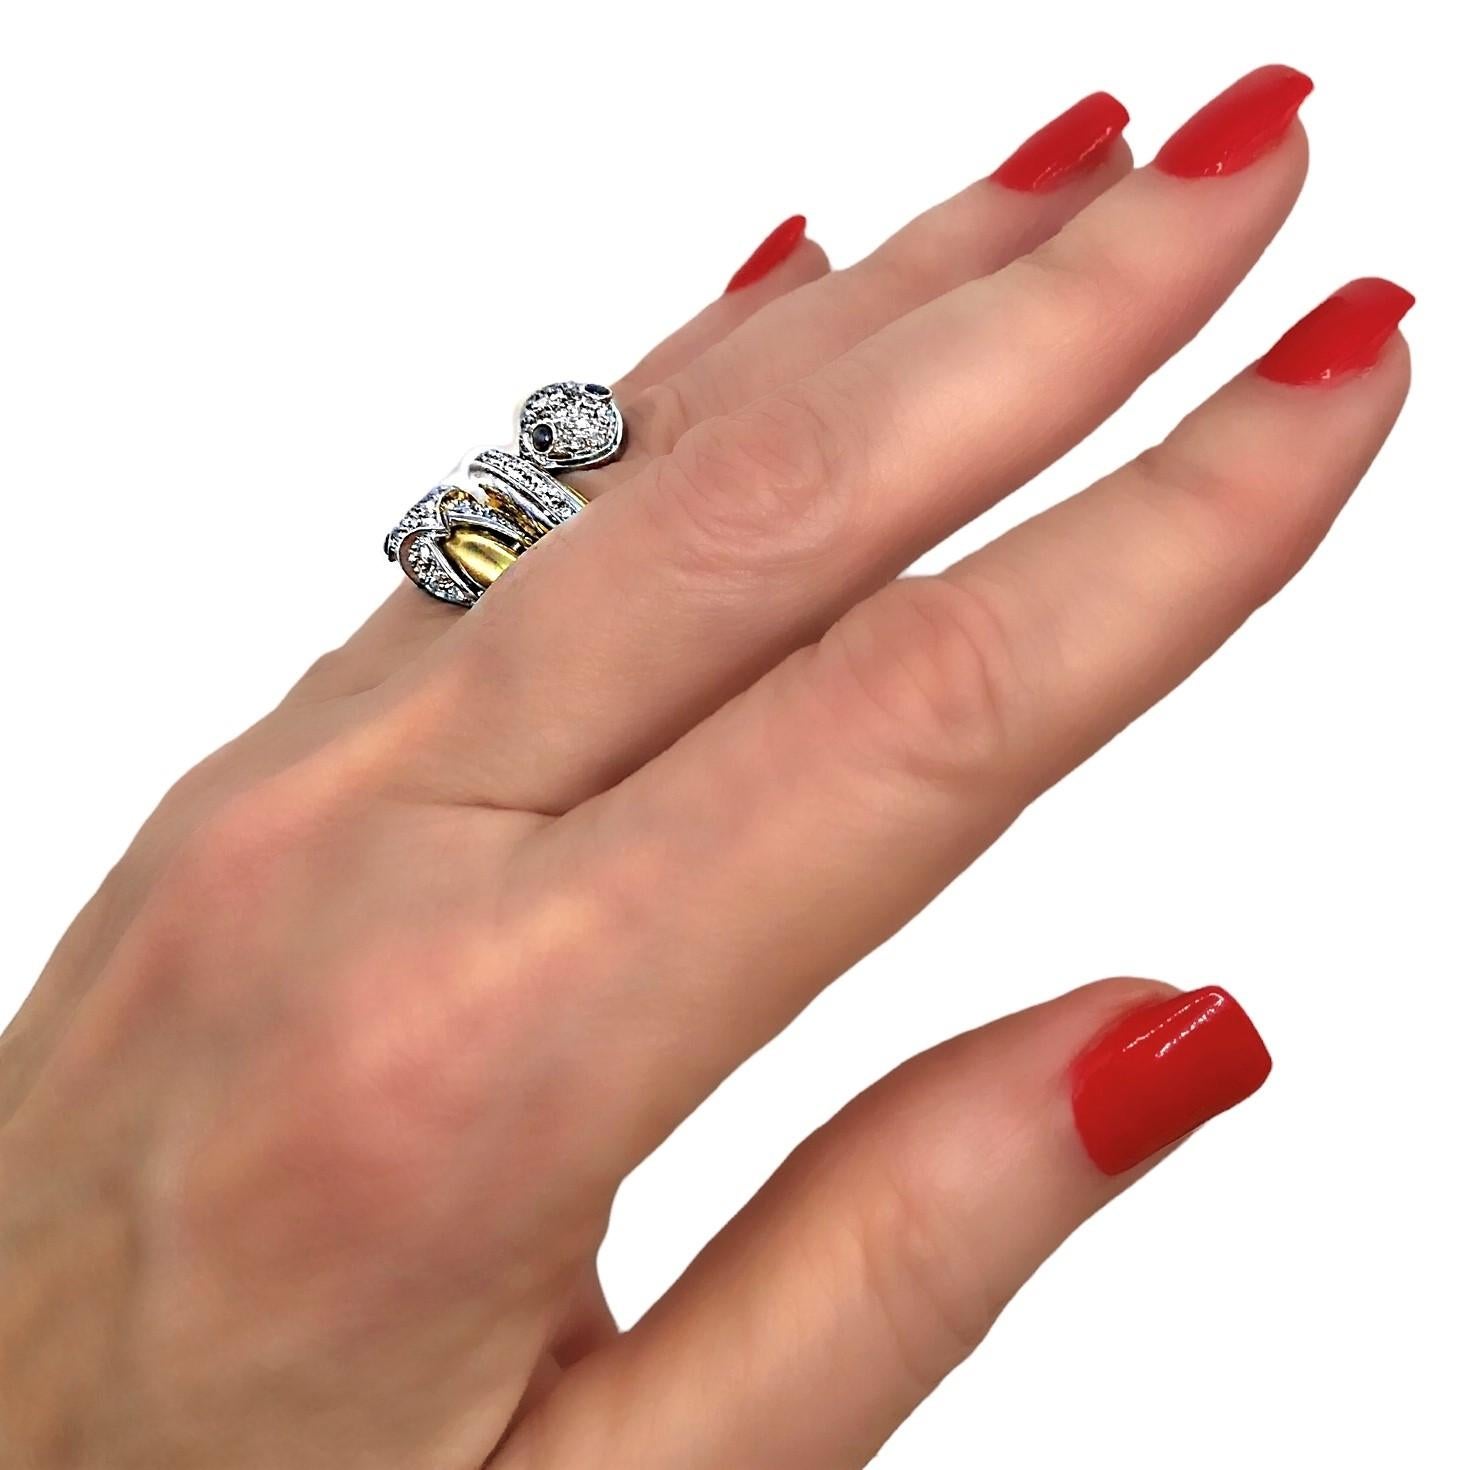 Women's Italian Diamond Encrusted Two Headed Snake Ring With Cabochon Sapphire Eyes For Sale